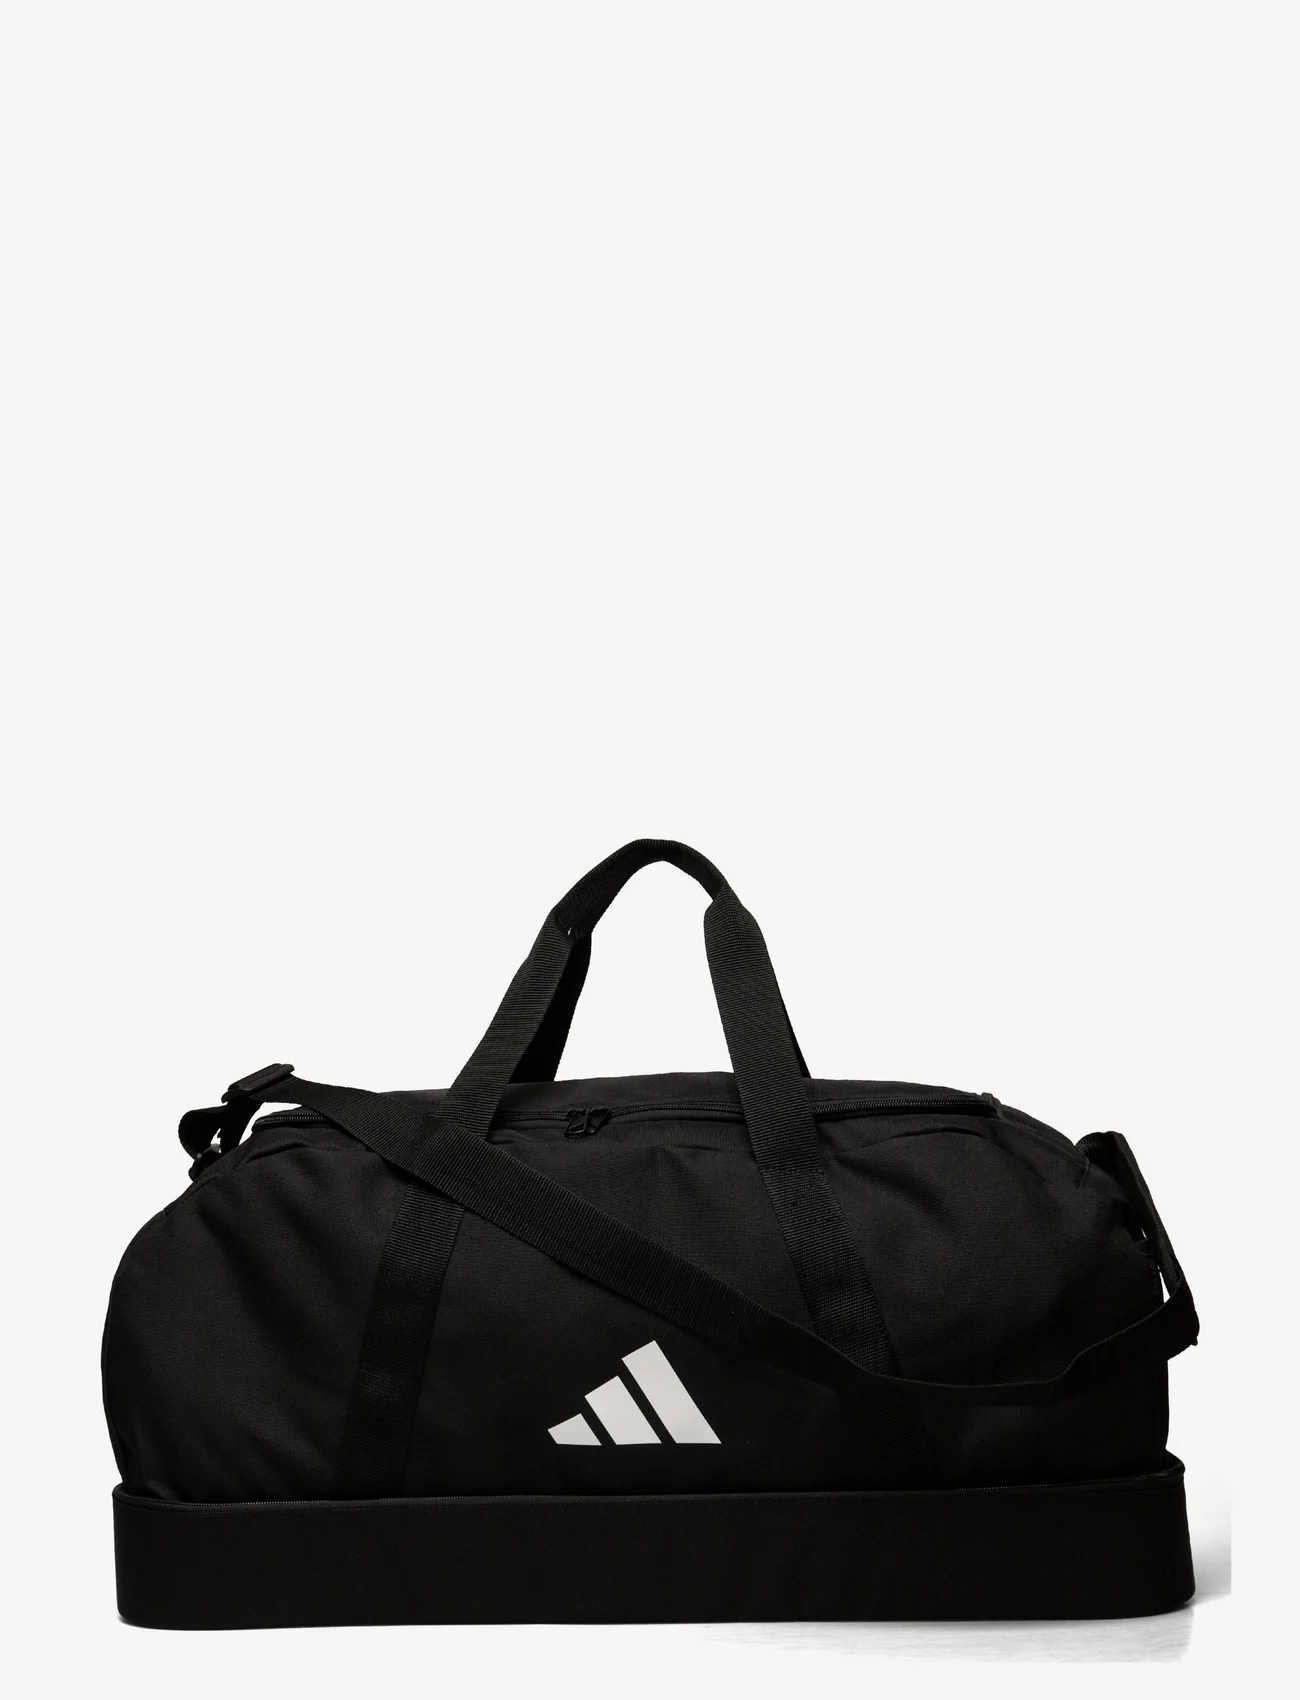 adidas Performance - TIRO LEAGUE DUFFLE BAG LARGE WITH BOTTOM COMPARTMENT - mehed - black/white - 0